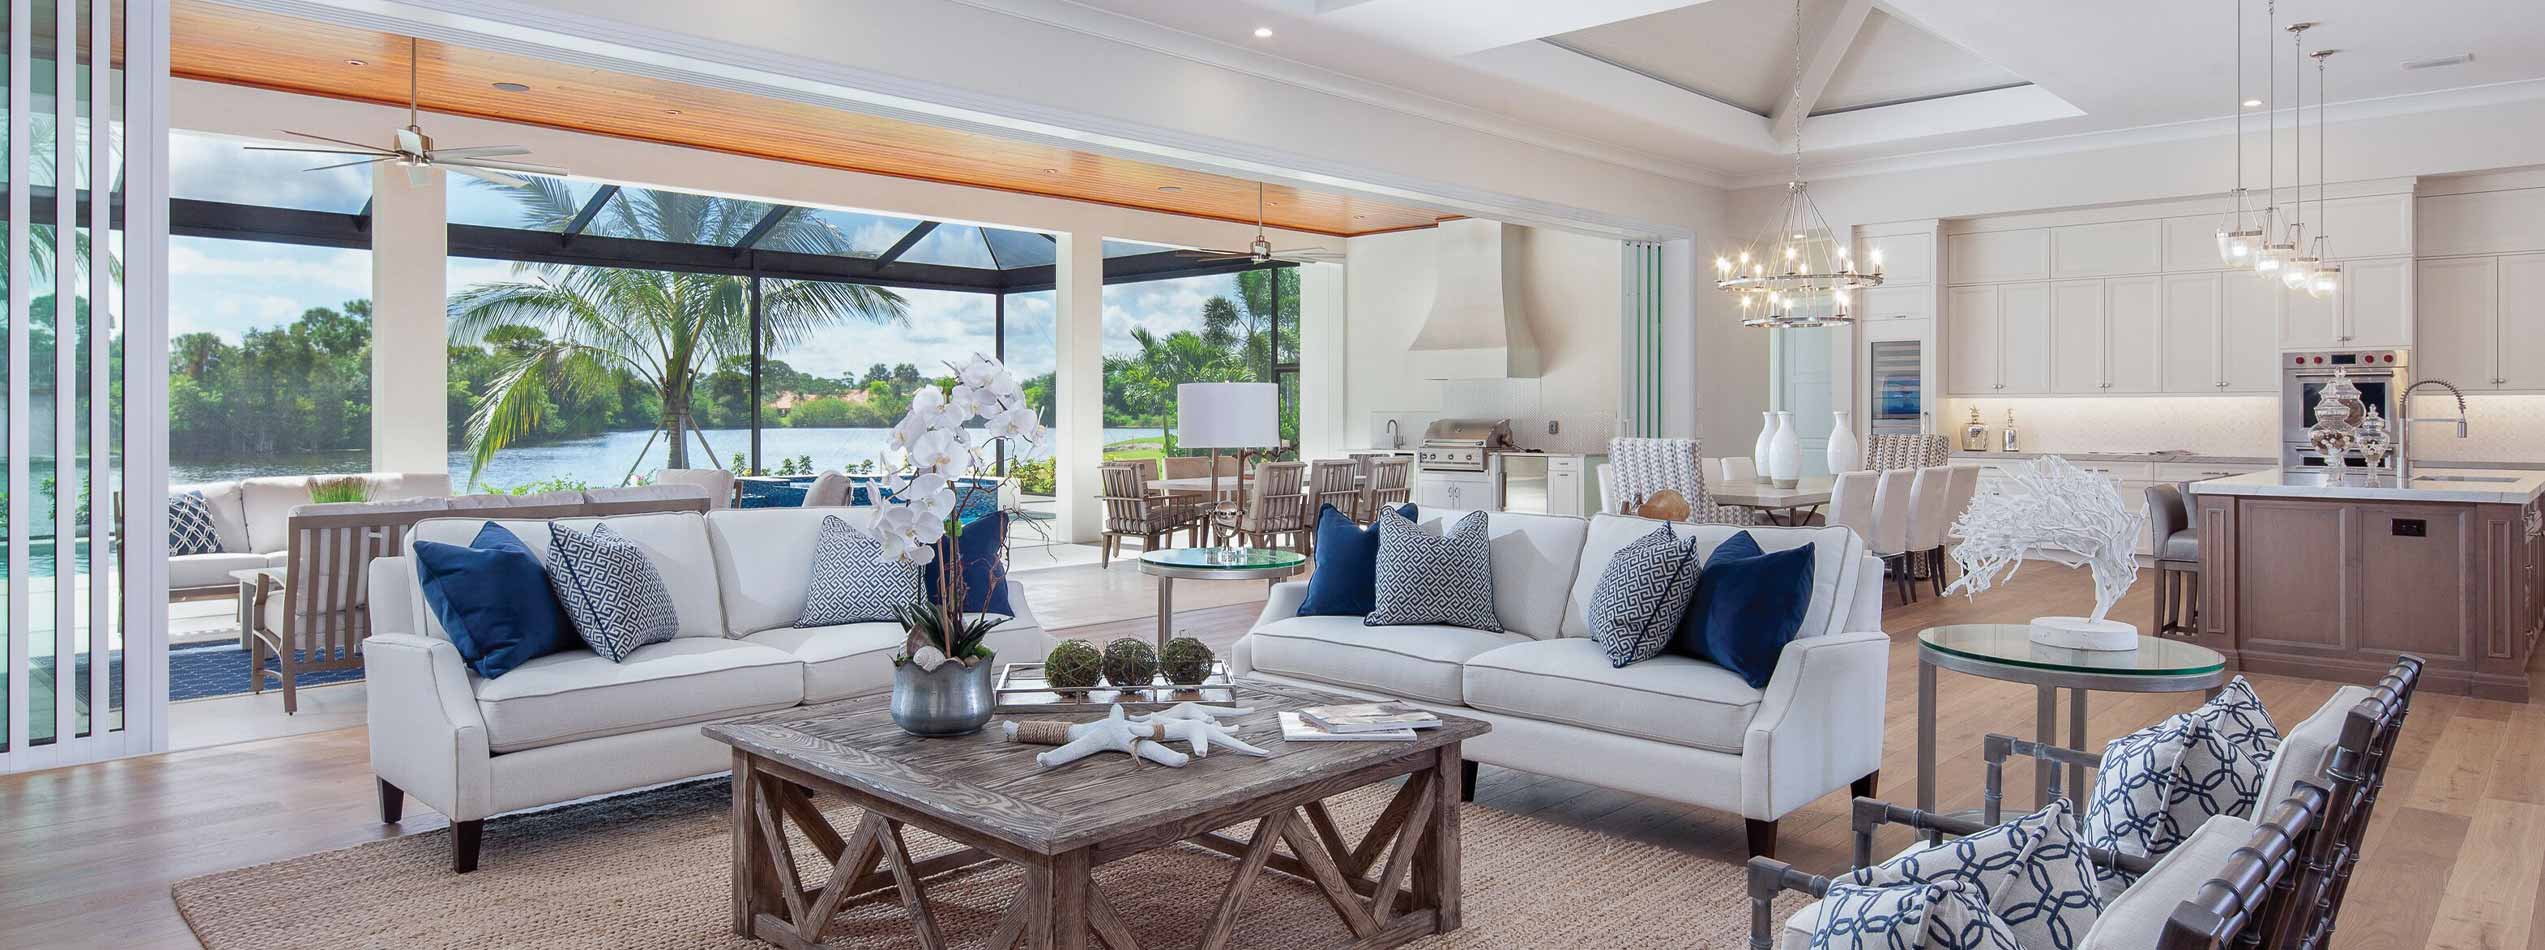 Livingroom Kitchen Combination In Front Of The Pool | Riverview Homes Naples Florida Luxury Home Builders